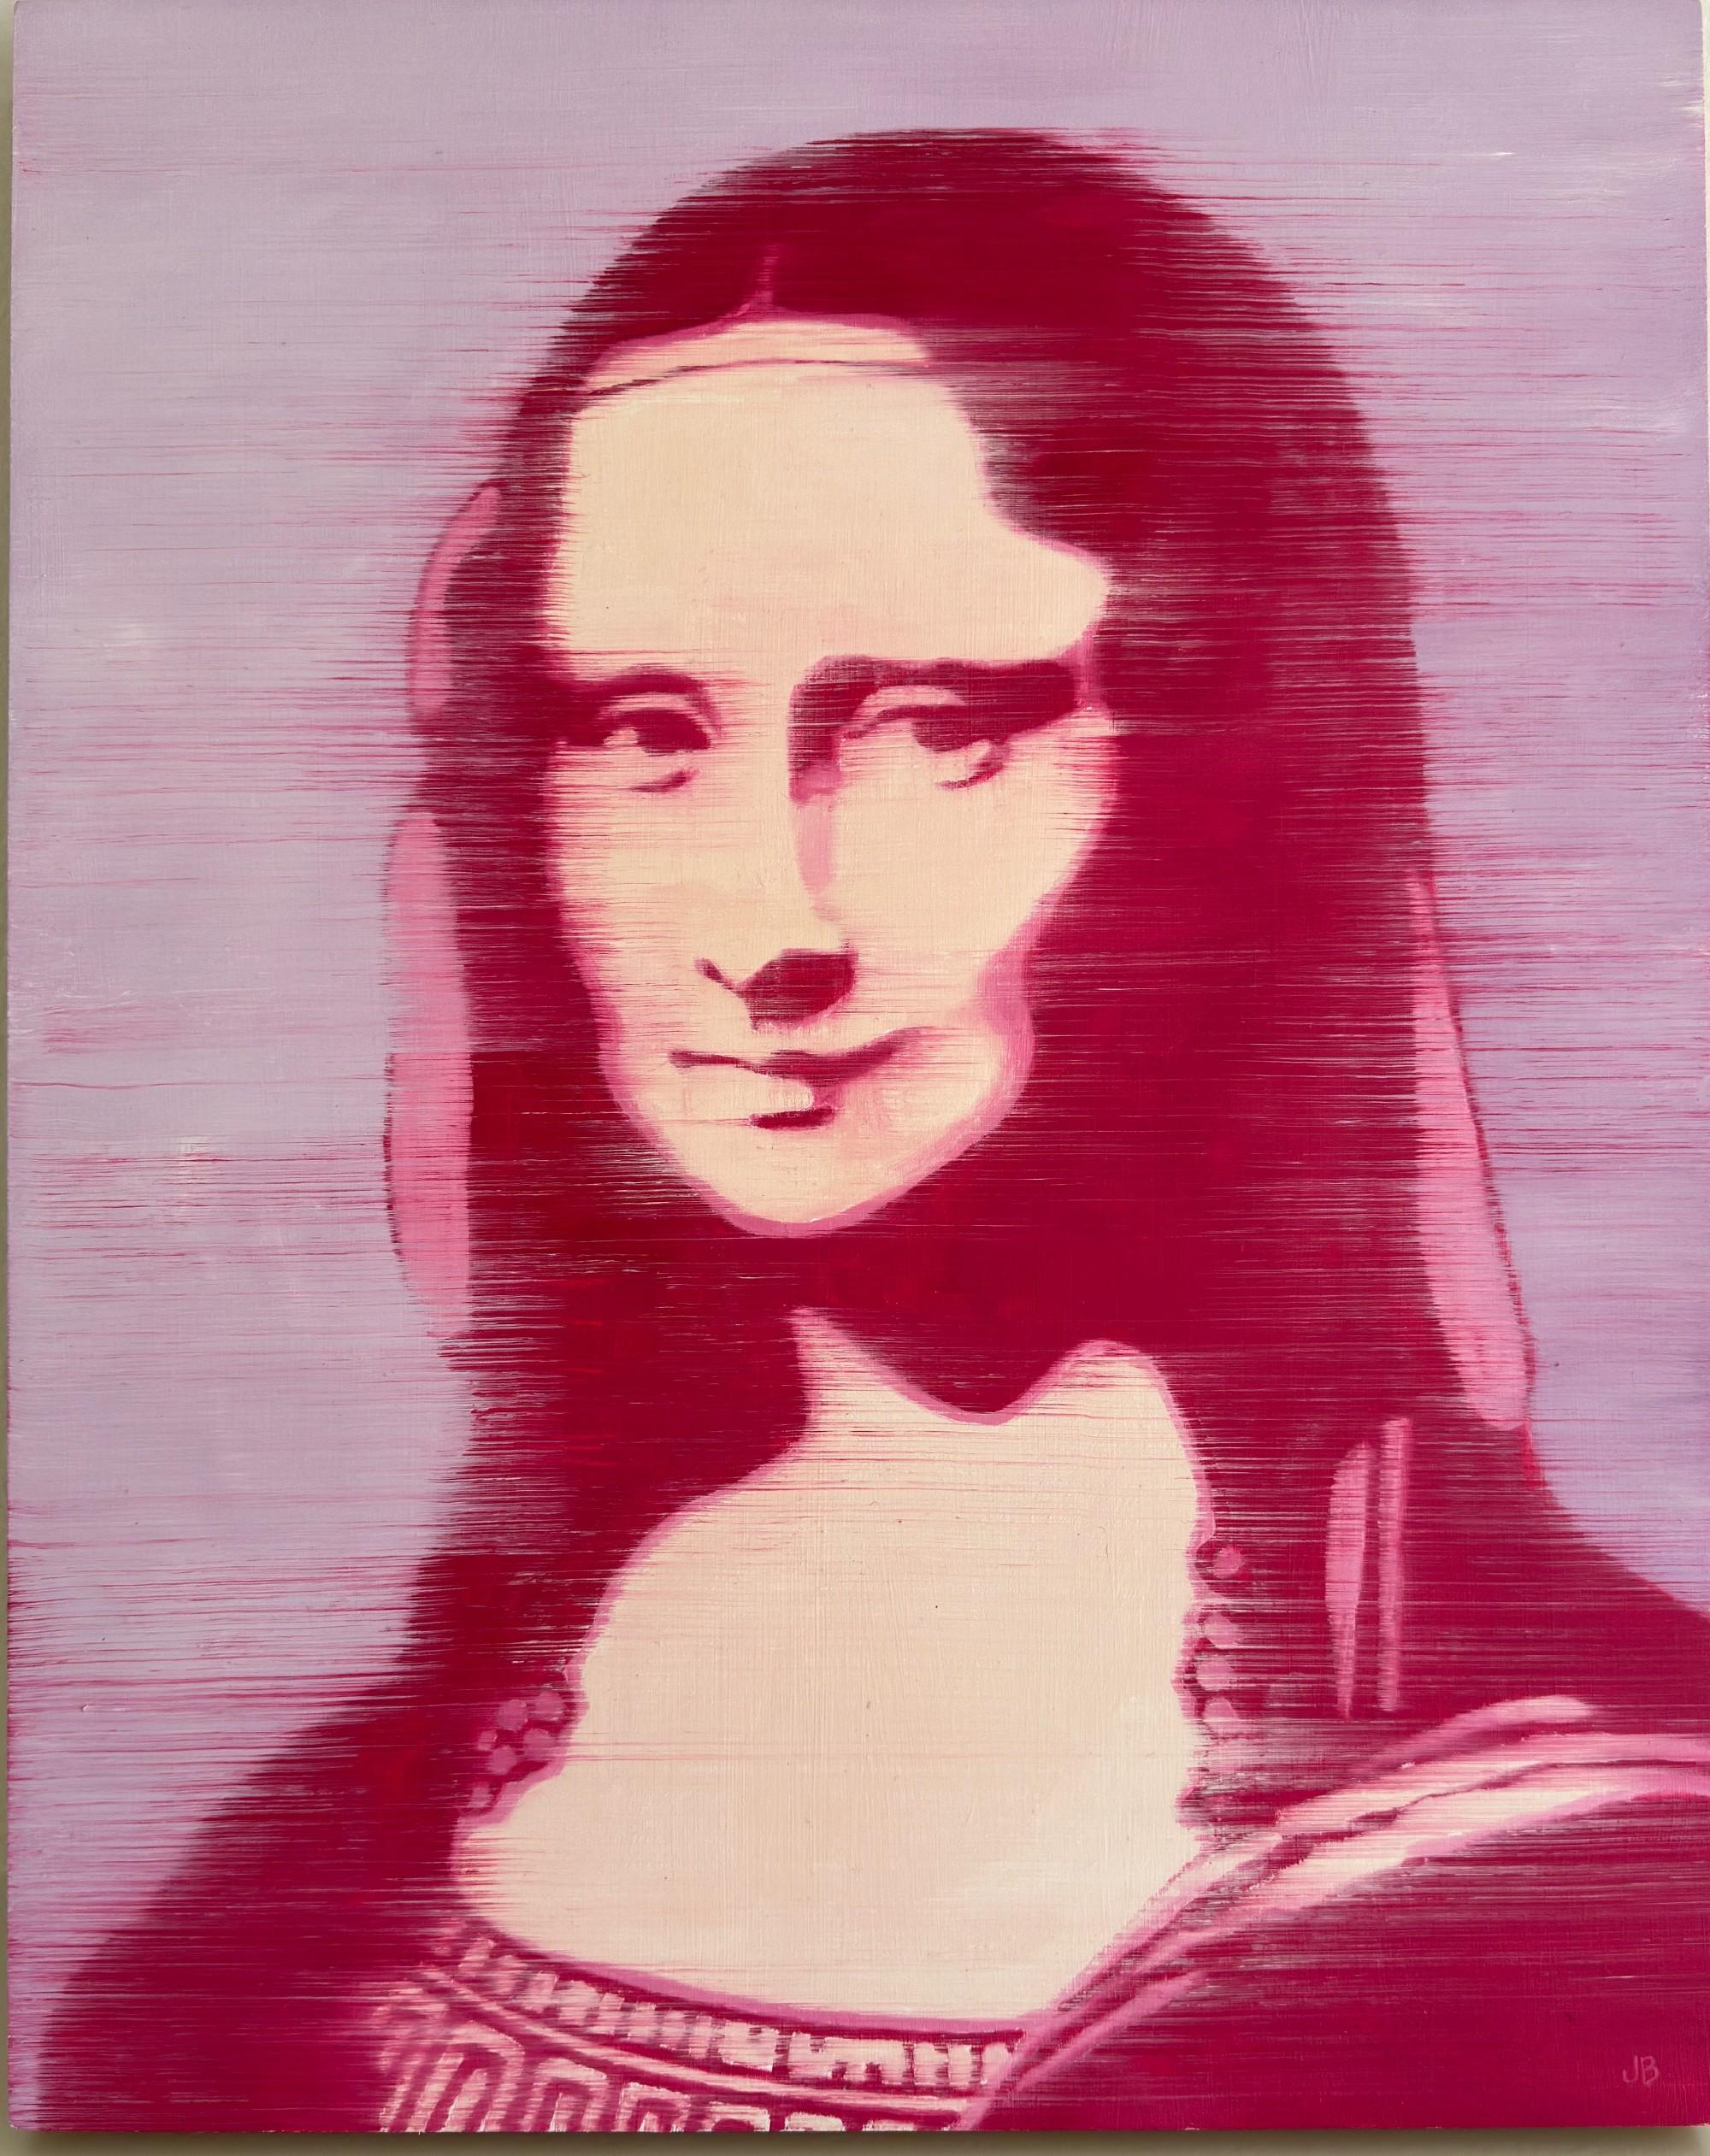 LOOK FOR FREE SHIPPING AT CHECKOUT.

ARTIST EXPLANATION OF THE PAINTINGS:
Mona Lisa Violet measures  20 x 16